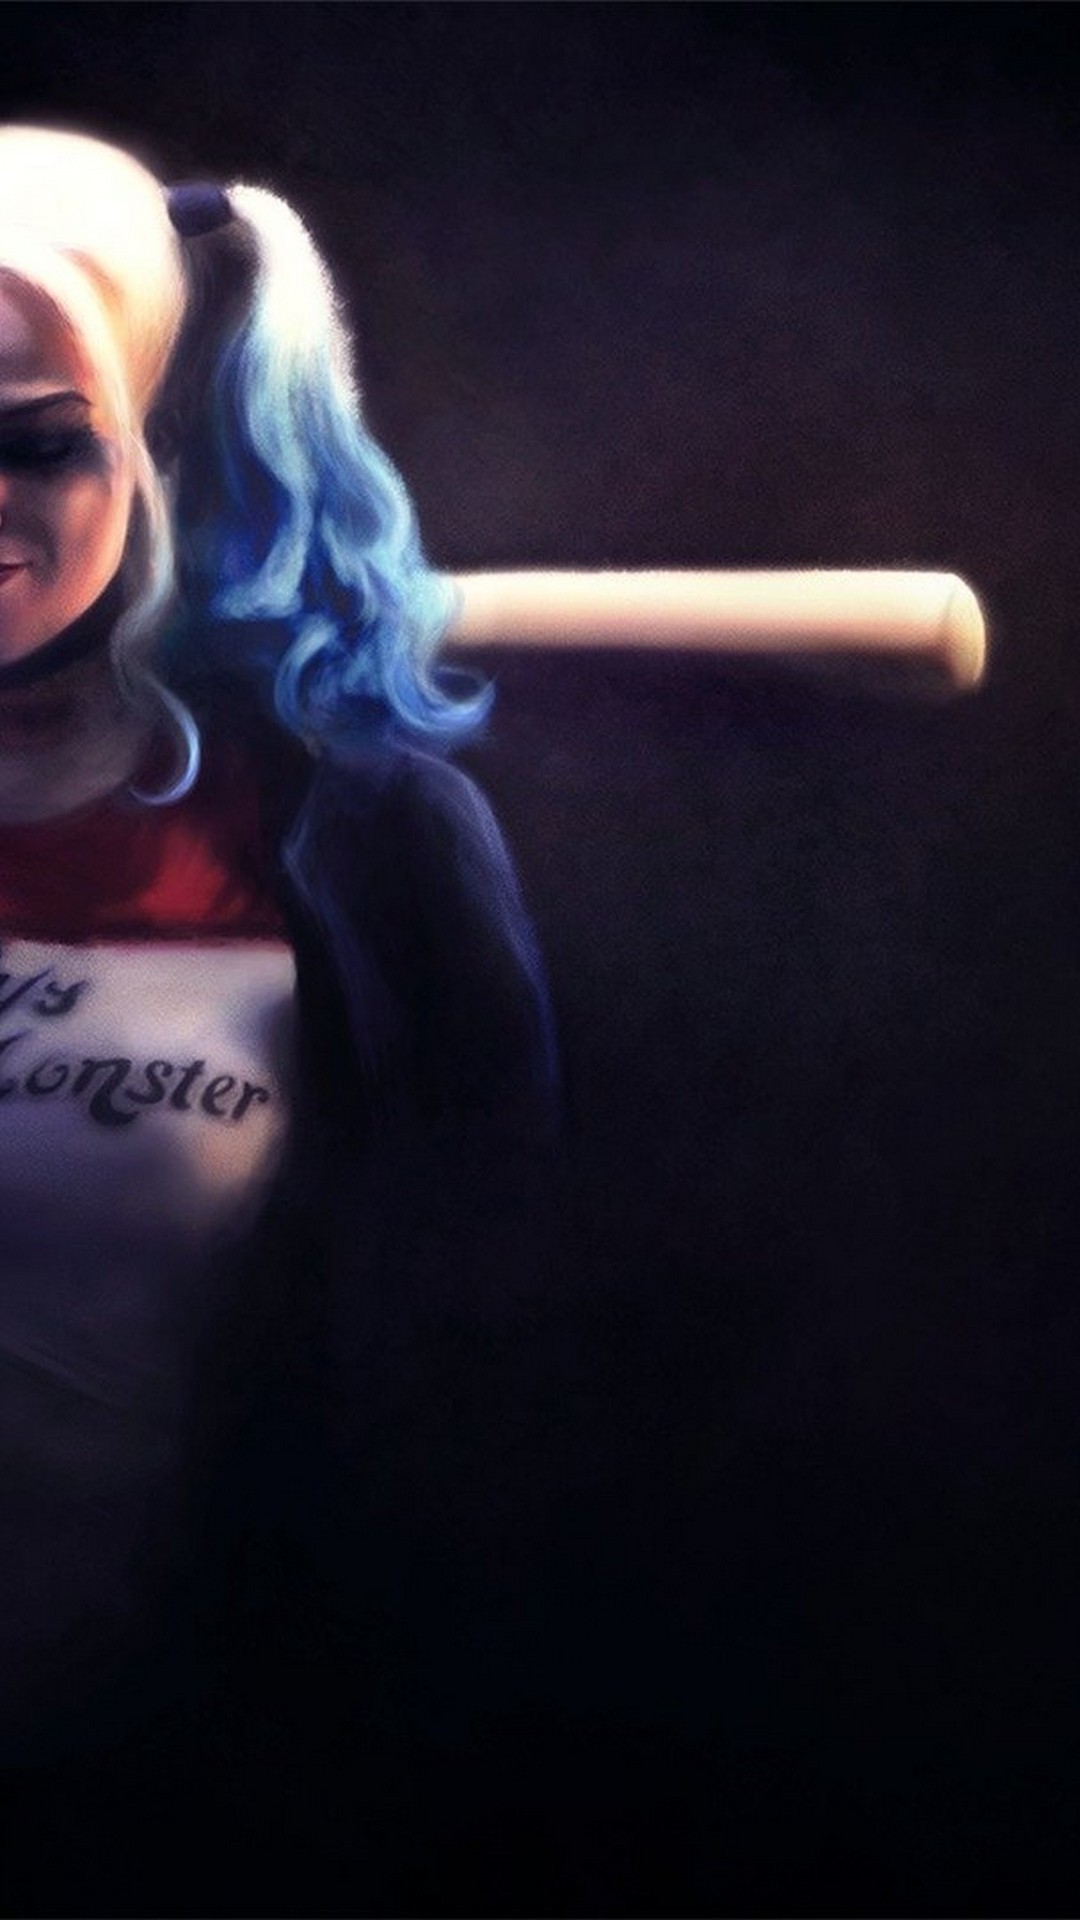 iPhone Wallpaper Pictures Of Harley Quinn with image resolution 1080x1920 pixel. You can make this wallpaper for your iPhone 5, 6, 7, 8, X backgrounds, Mobile Screensaver, or iPad Lock Screen